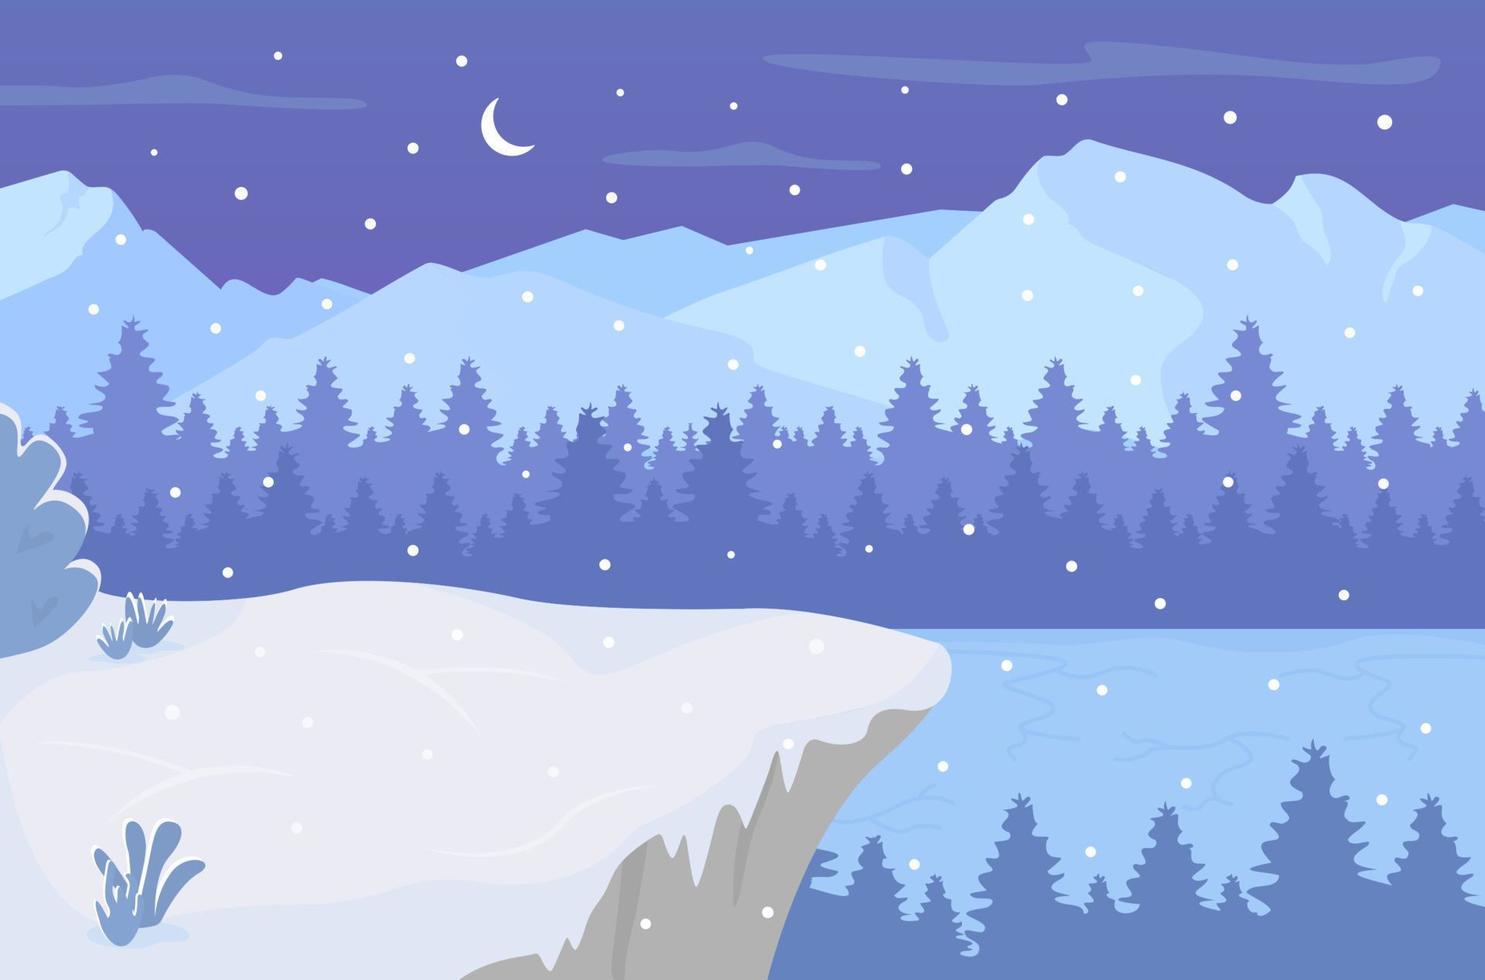 Night on frozen lake flat color vector illustration. Snowflakes falling on hills in woodland. Wintertime snowy 2D cartoon landscape with nighttime sky with crescent moon on background